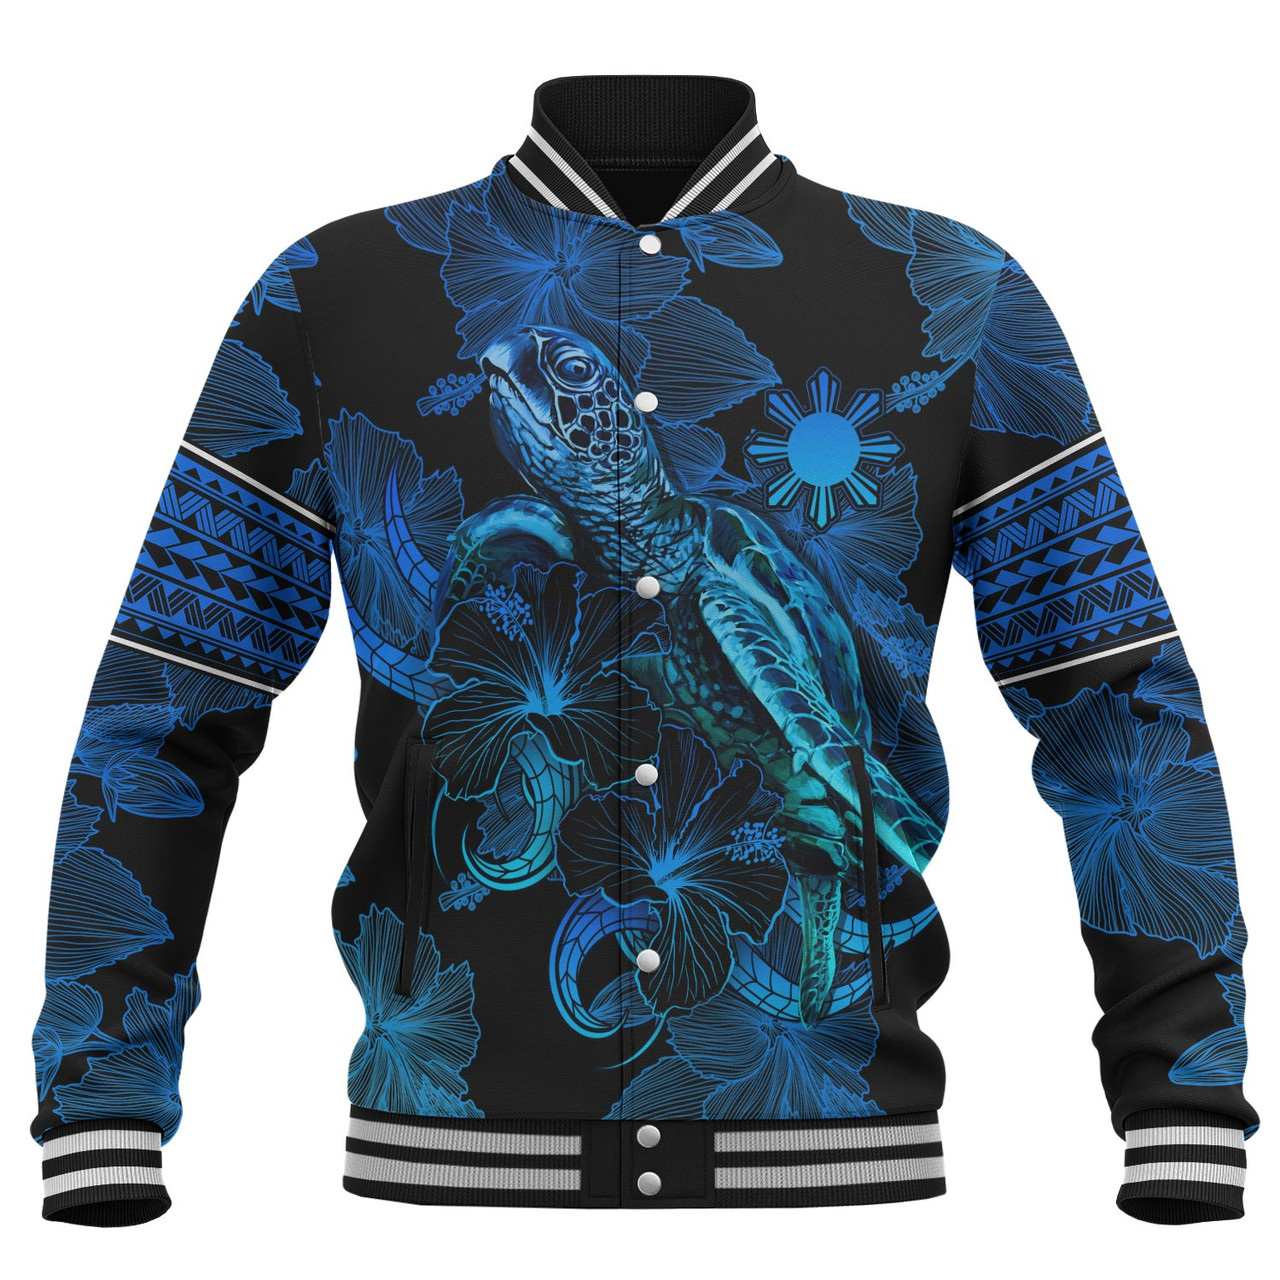 Philippines Filipinos Baseball Jacket Sea Turtle With Blooming Hibiscus Flowers Tribal Blue